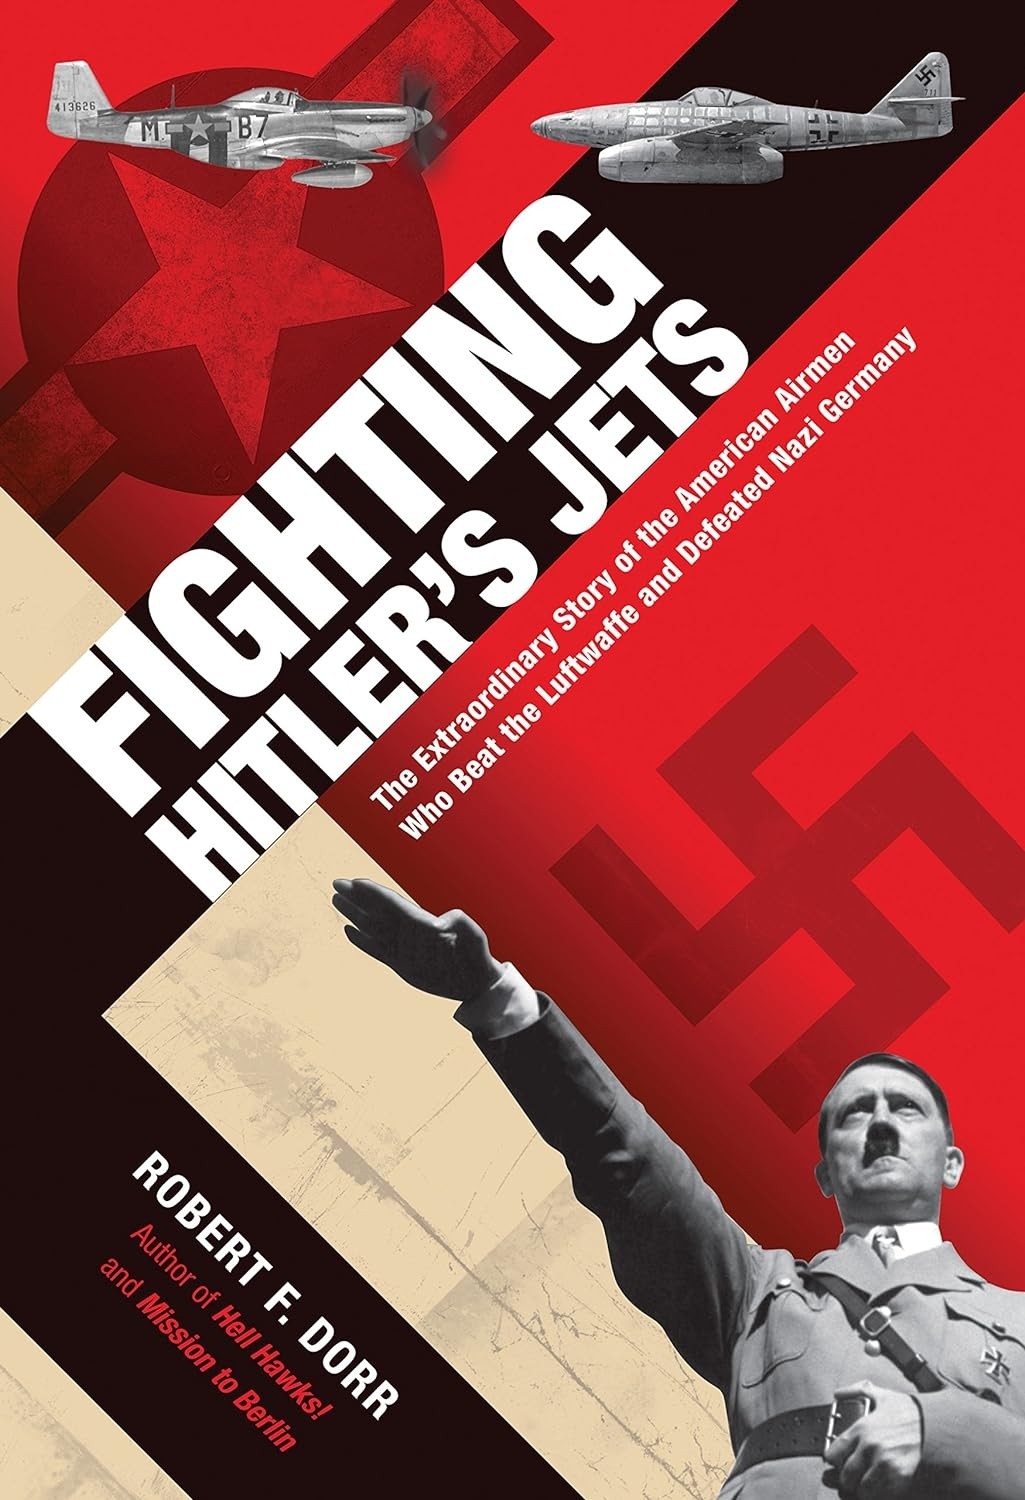 Fighting Hitler's Jets: The extraordinary story of the US airmen who beat the Luftwaffe and defeated nazi Germany